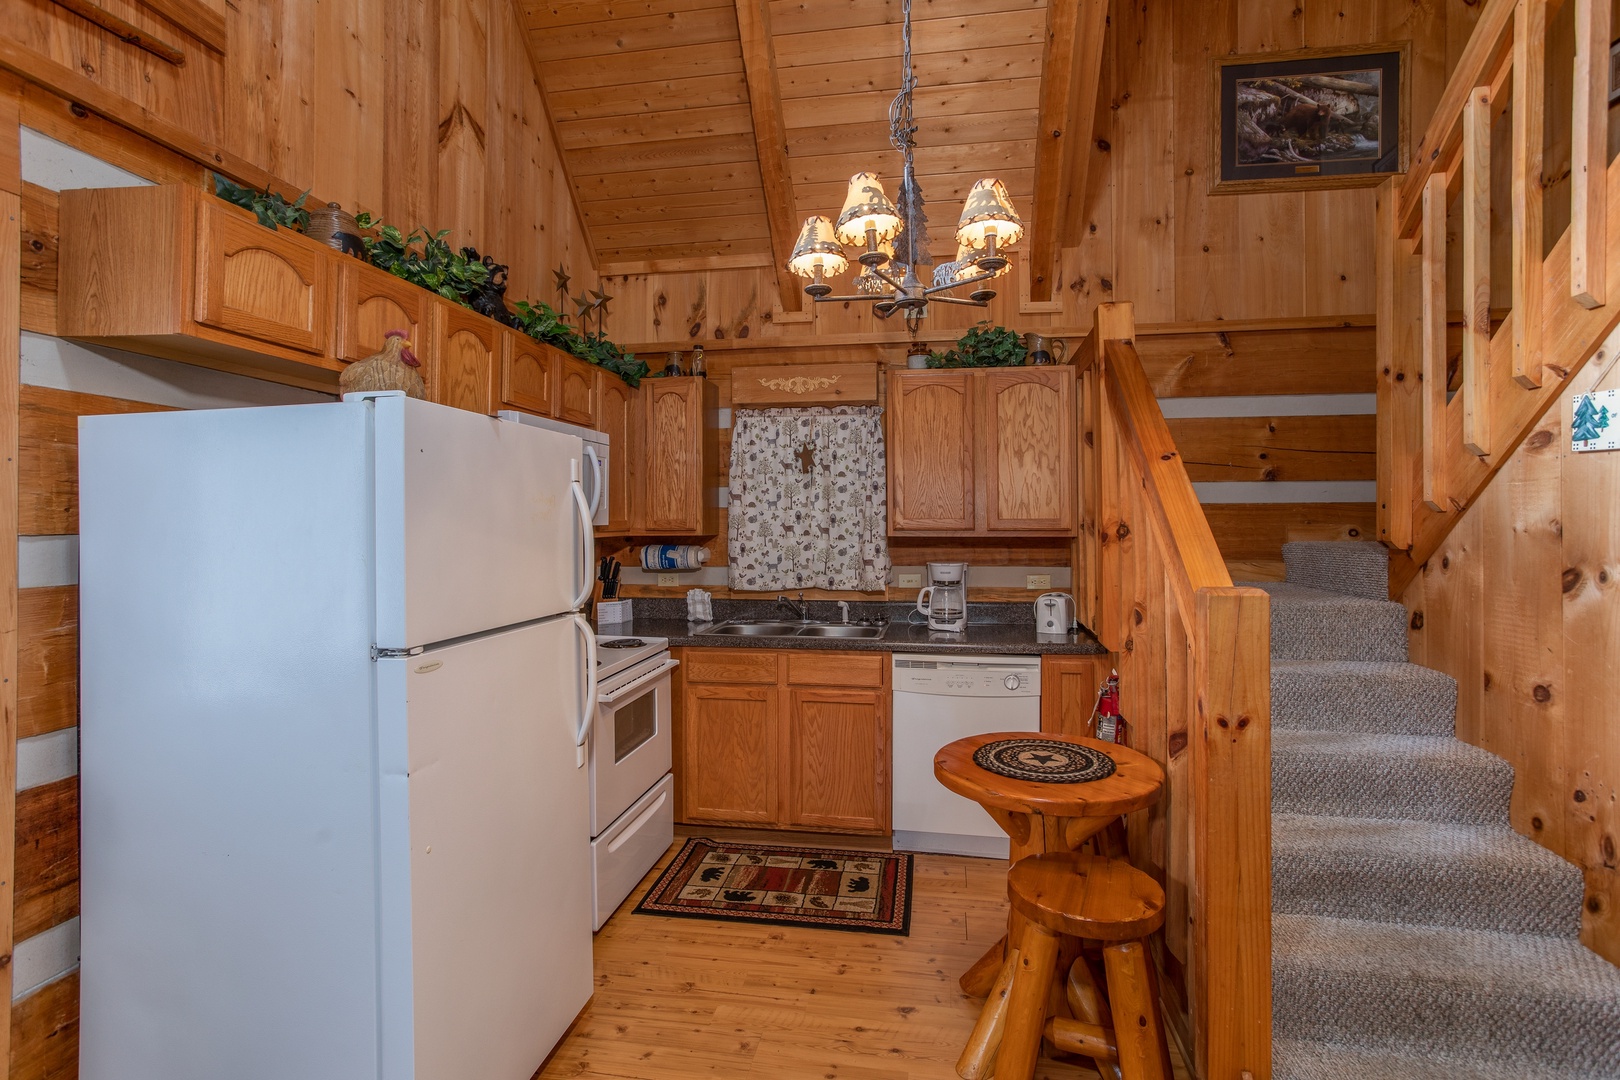 Kitchen with white appliances at Bearfoot Crossing, a 1-bedroom cabin rental located in Pigeon Forge